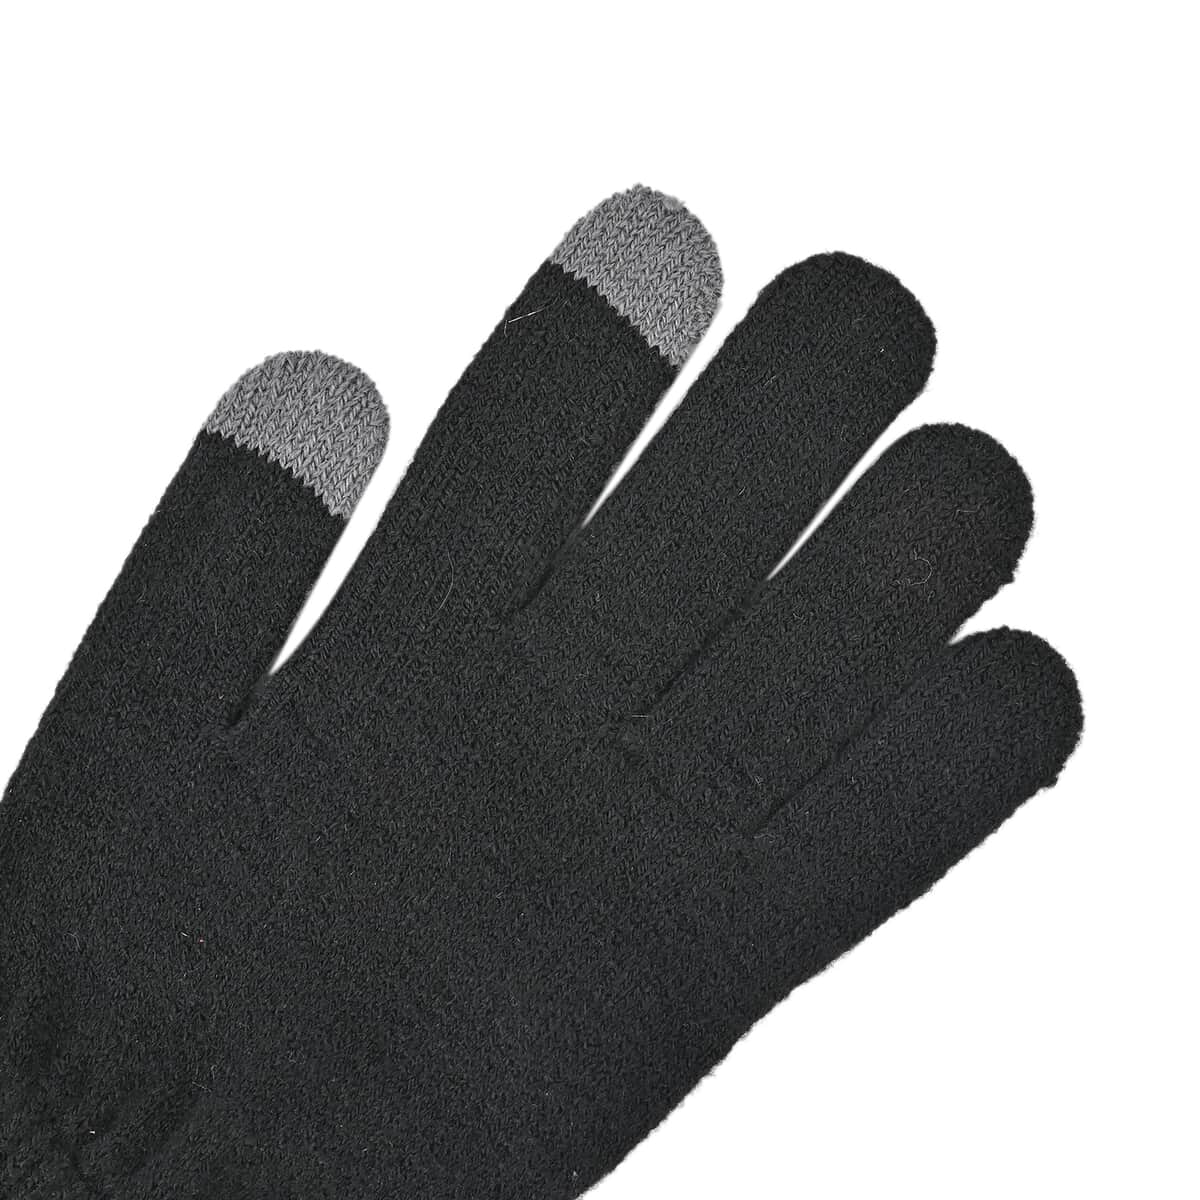 Black 100% Acrylic 3pcs Set Glove (8.66), Scarf (9.85x8.66) and Hat (10.24x9.05) image number 4